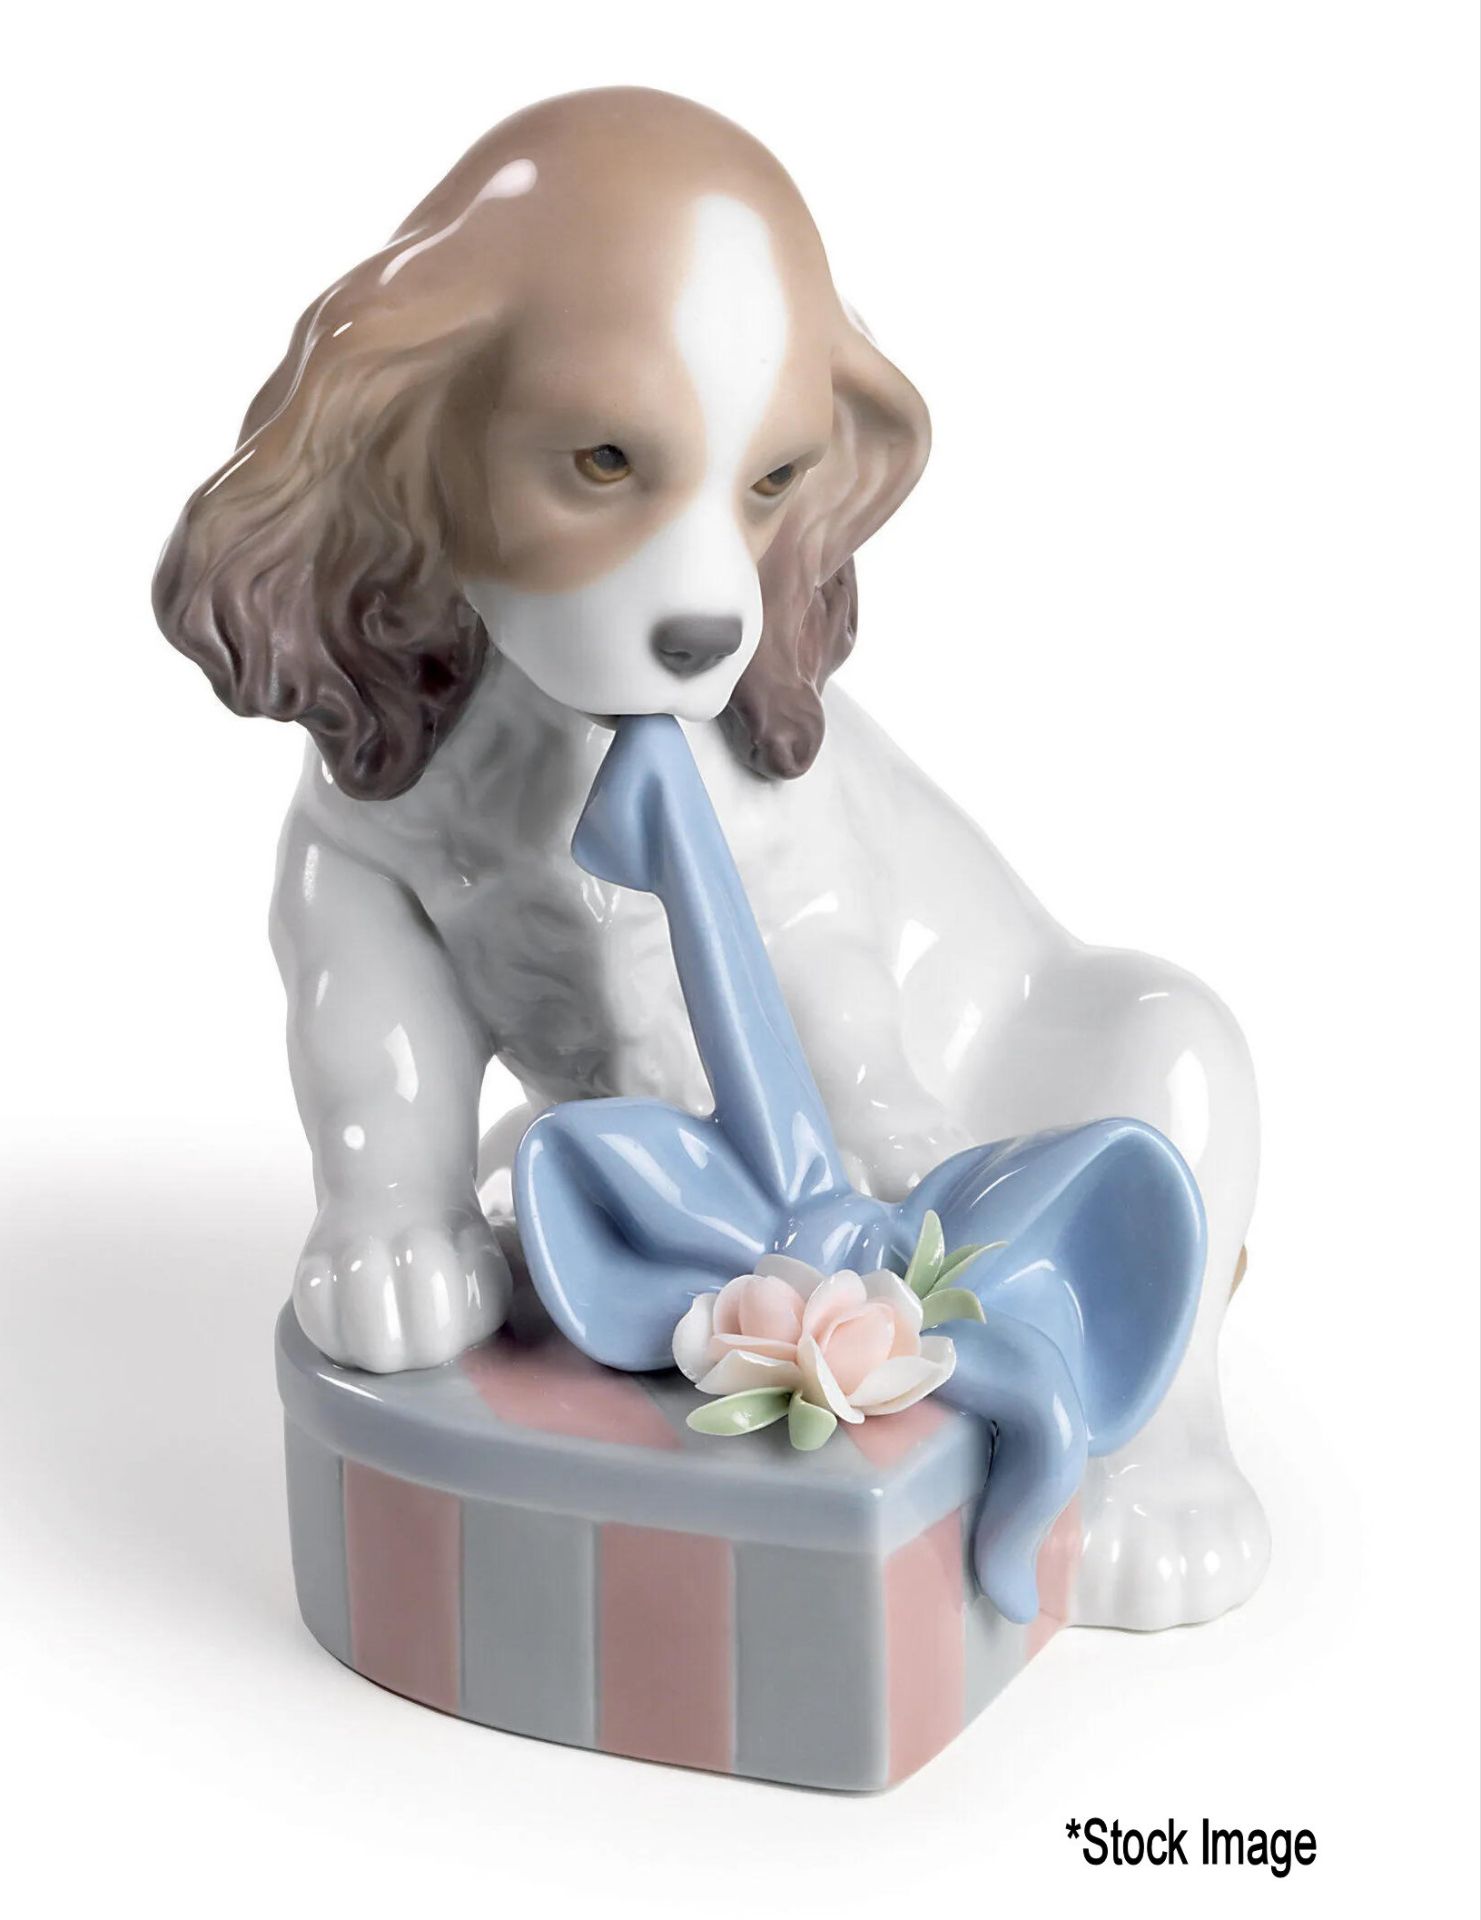 1 x LLADRO Can't Wait Puppy Dog Porcelain Figurine - New/Boxed - RRP £330 - Ref: /HOC244/HC5 - CL987